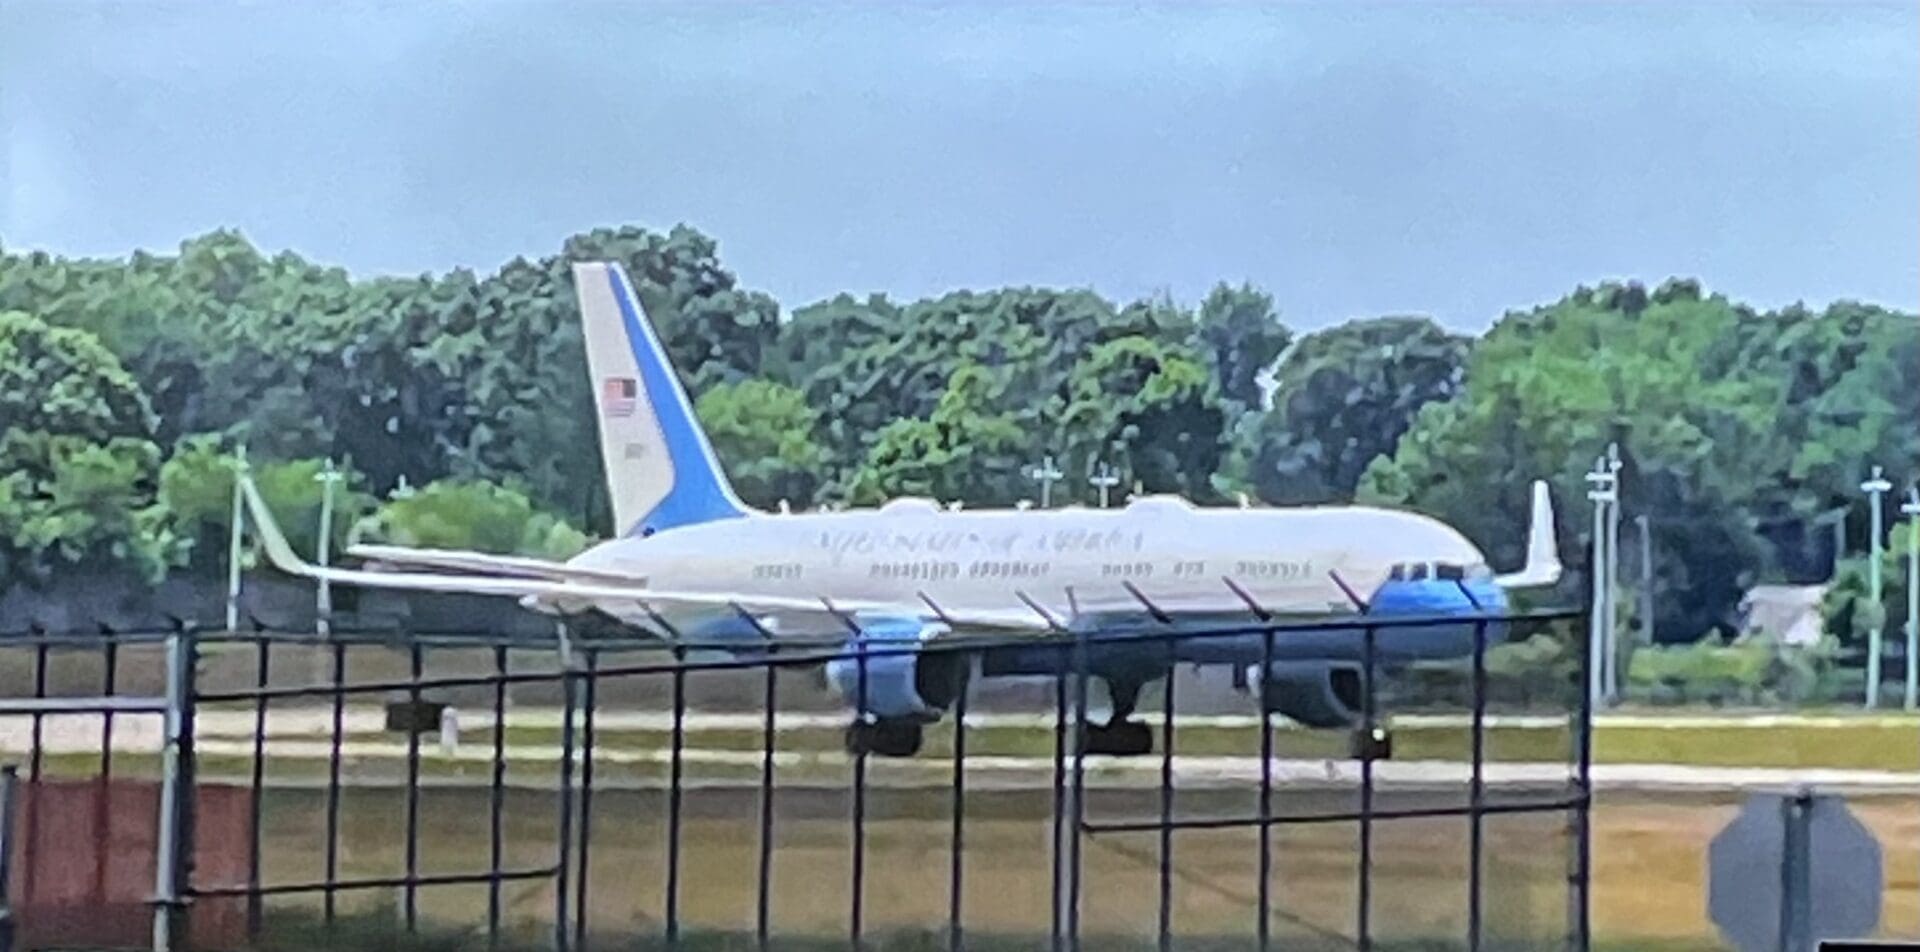 The air force one is taking off from the airport.